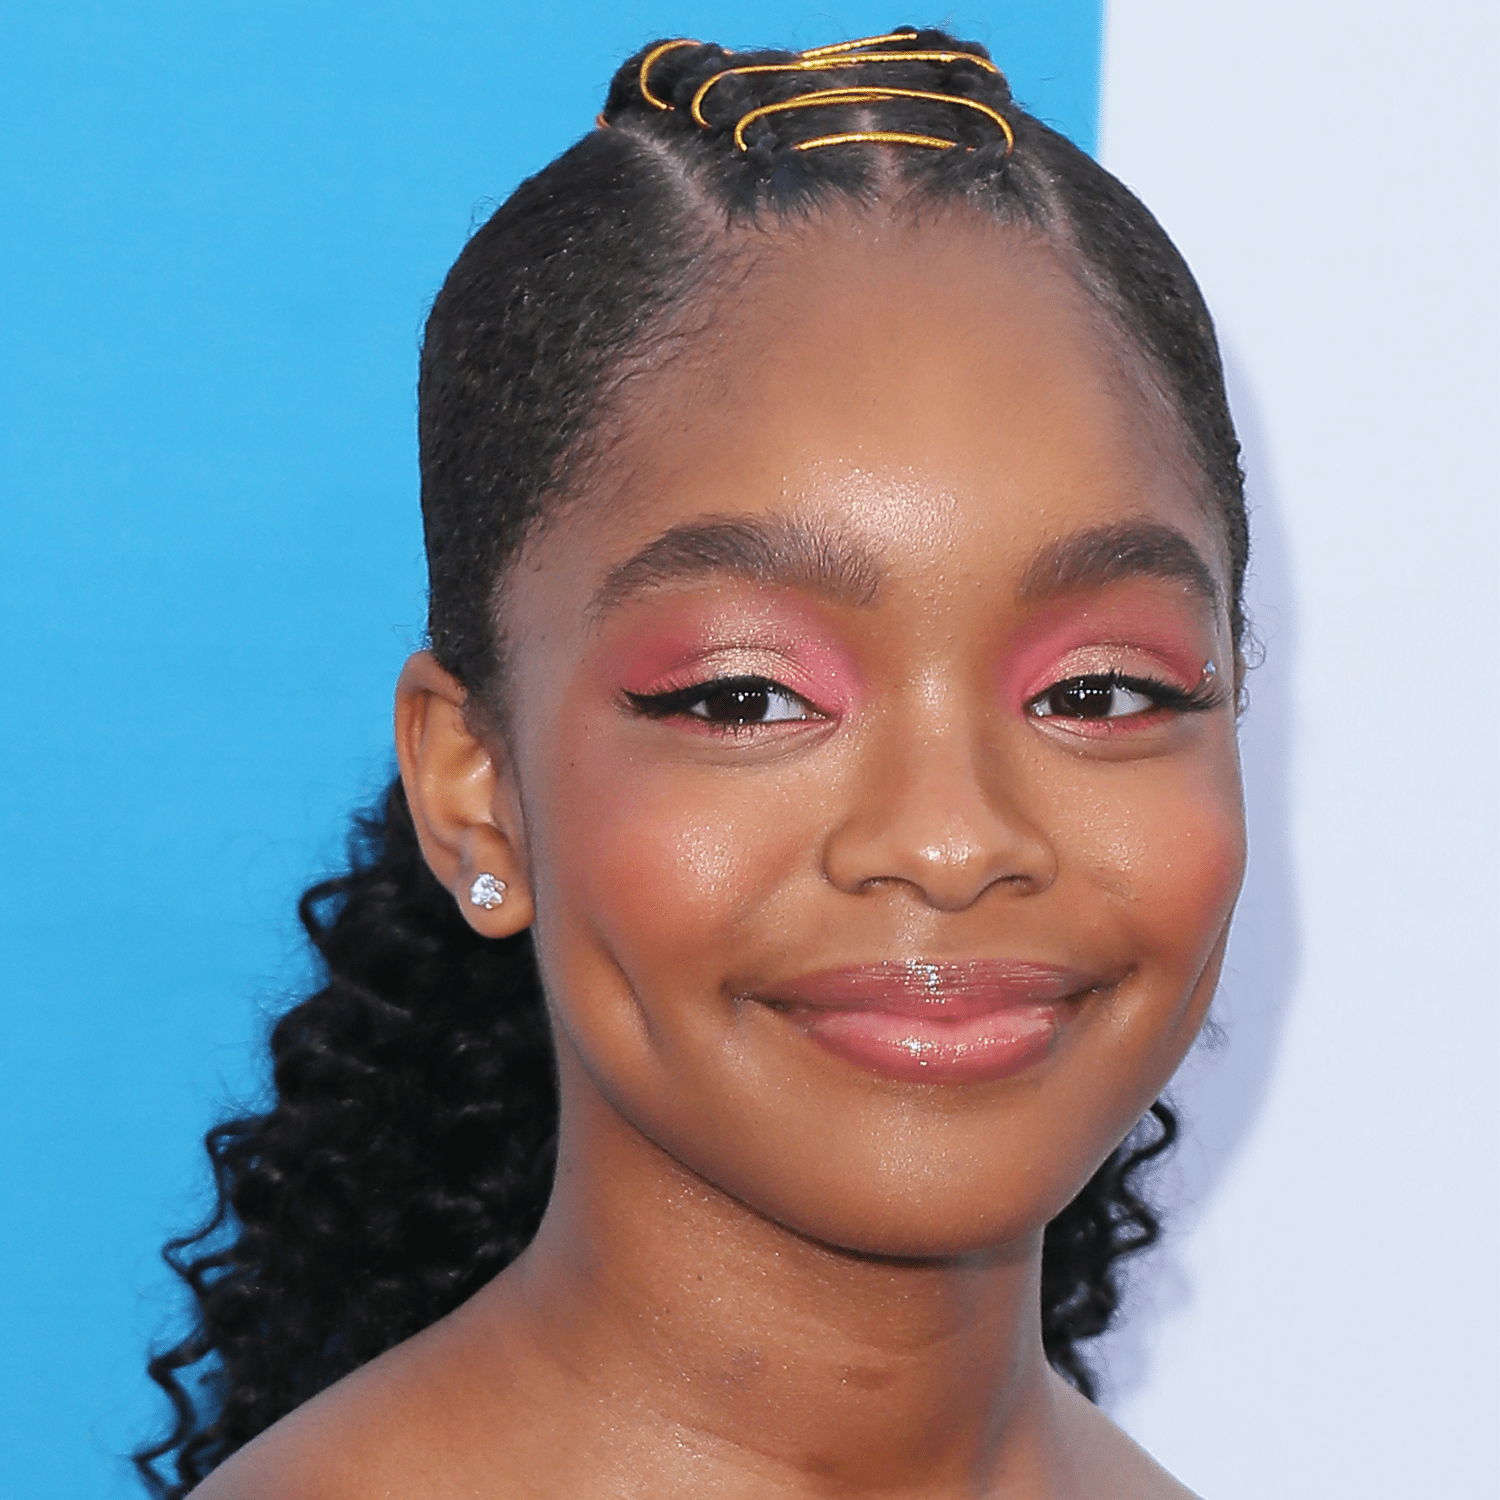 WESTWOOD, CALIFORNIA - APRIL 08: Marsai Martin attends The Premiere Of Universal Pictures "Little" at Regency Village Theatre on April 08, 2019 in Westwood, California. (Photo by Leon Bennett/WireImage)